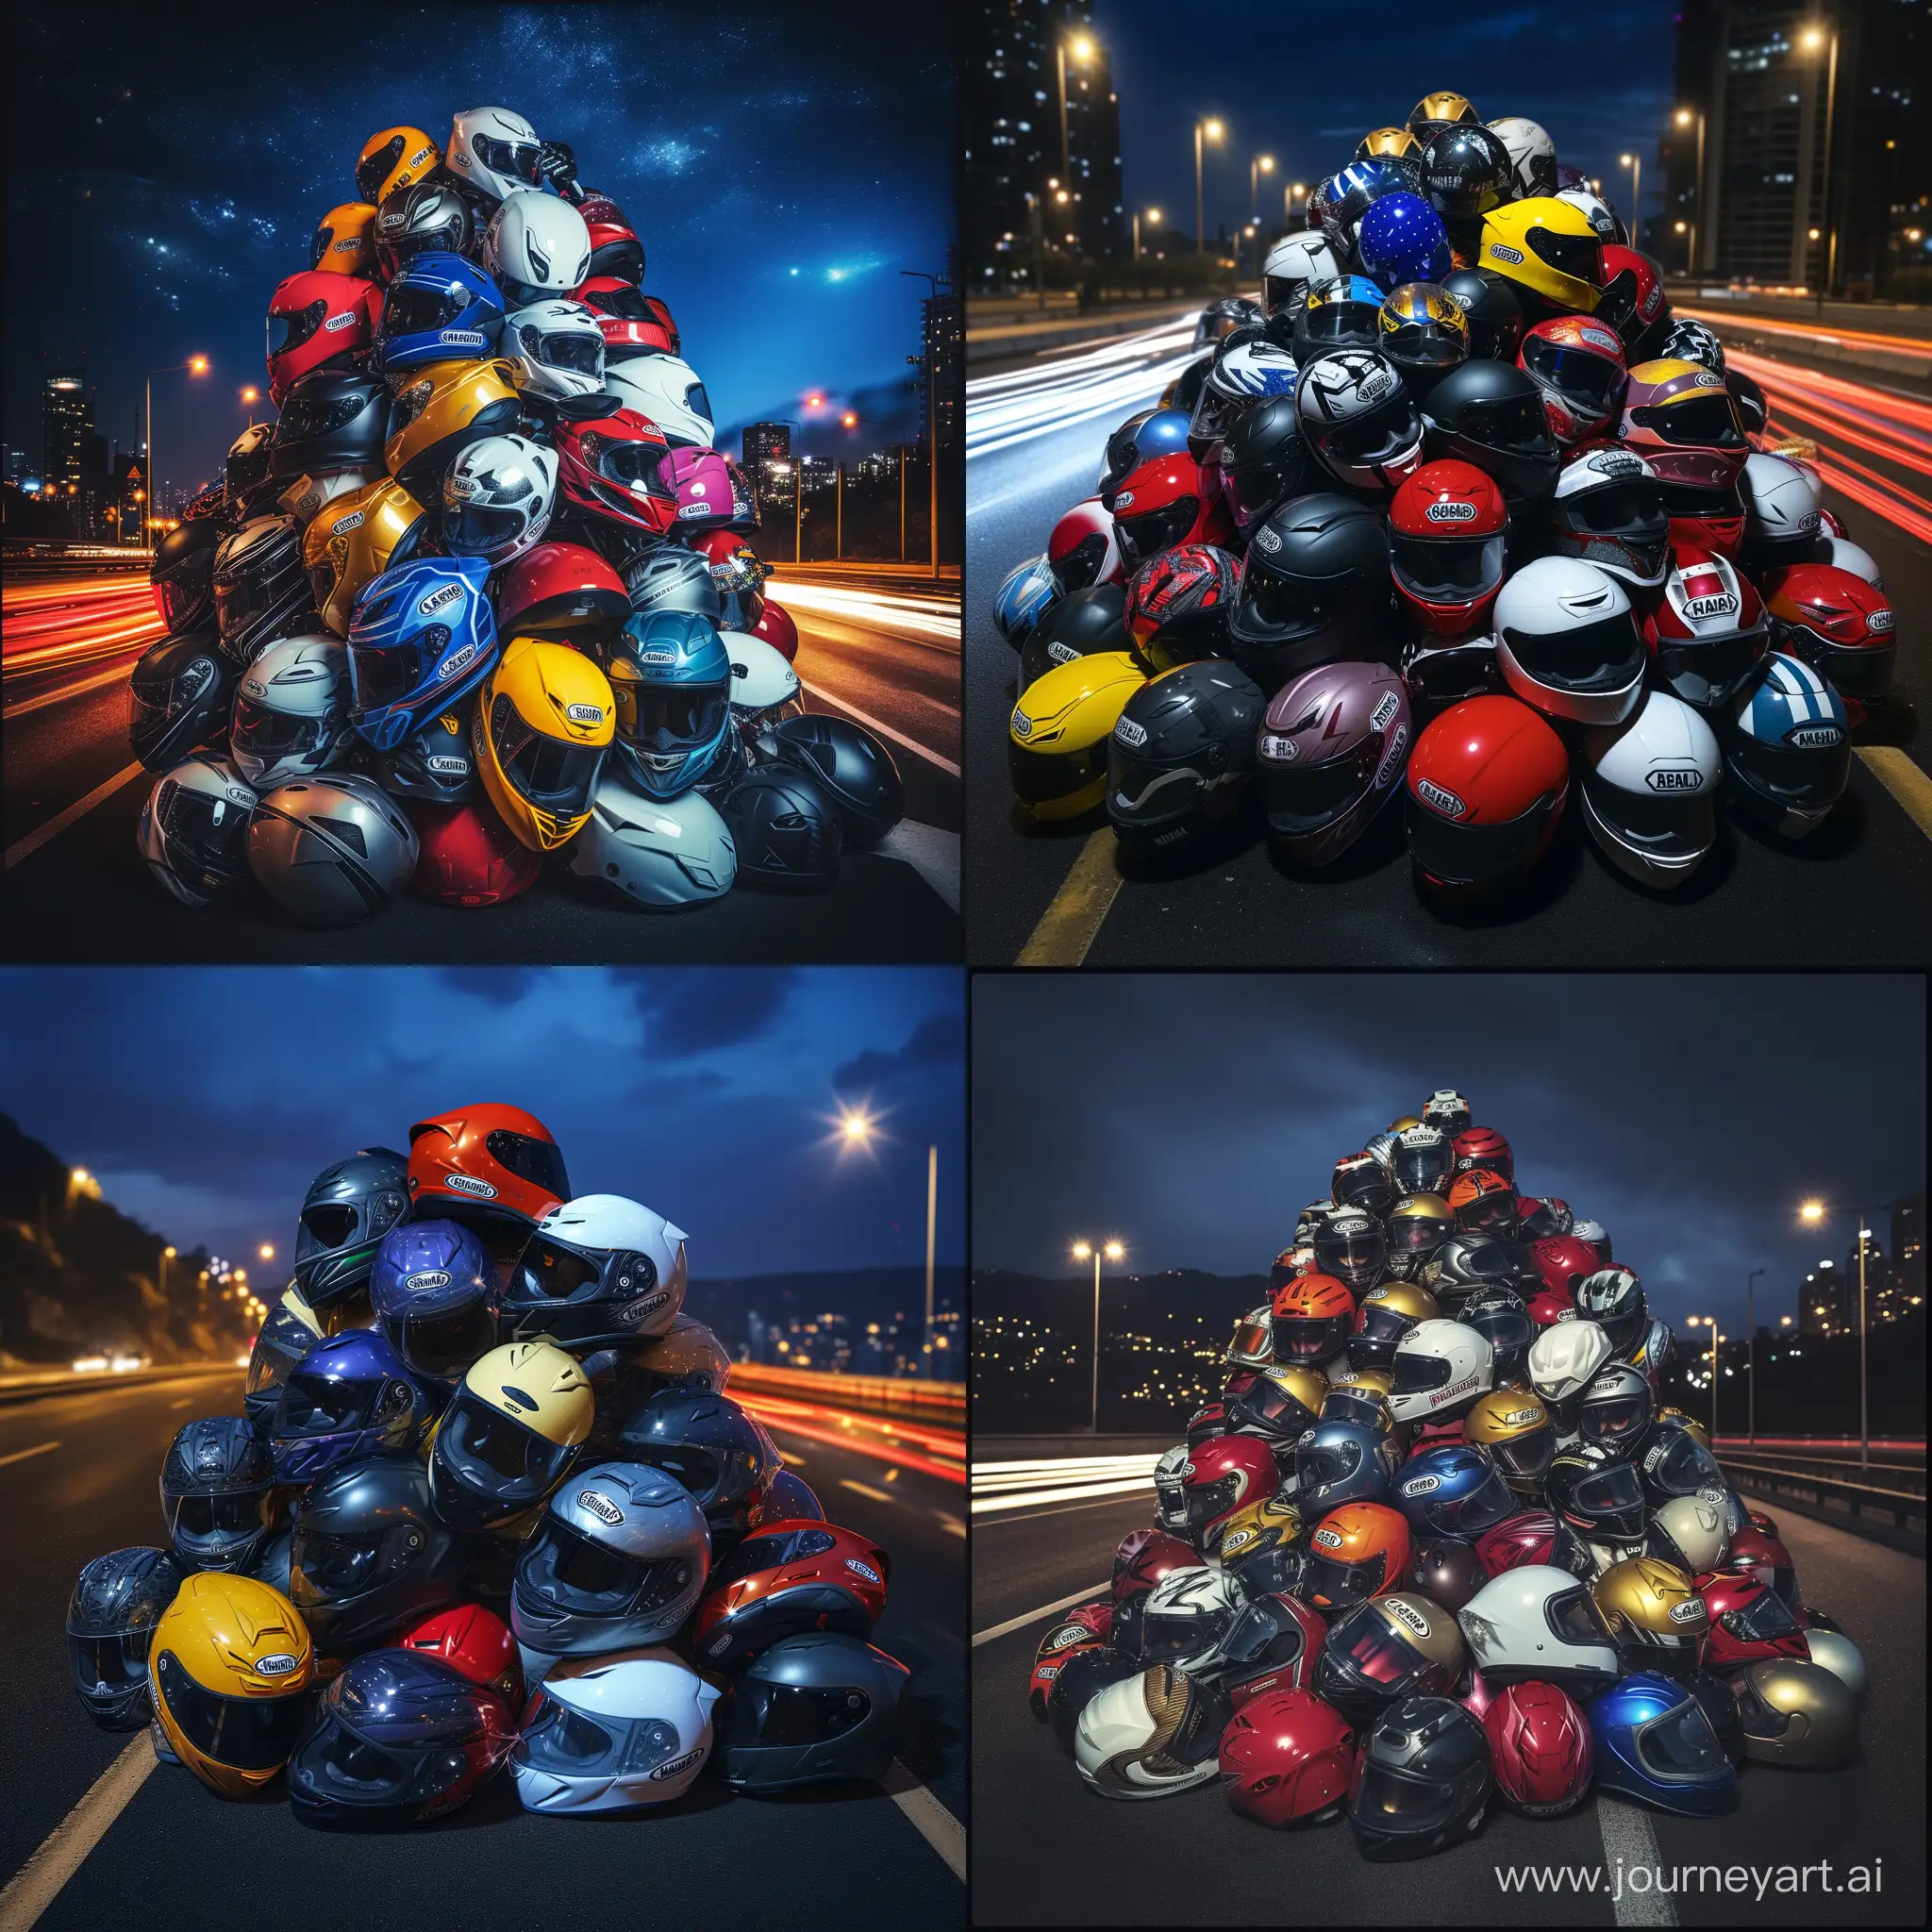 Colorful-Motorcycle-Helmets-Piled-High-on-City-Road-at-Night